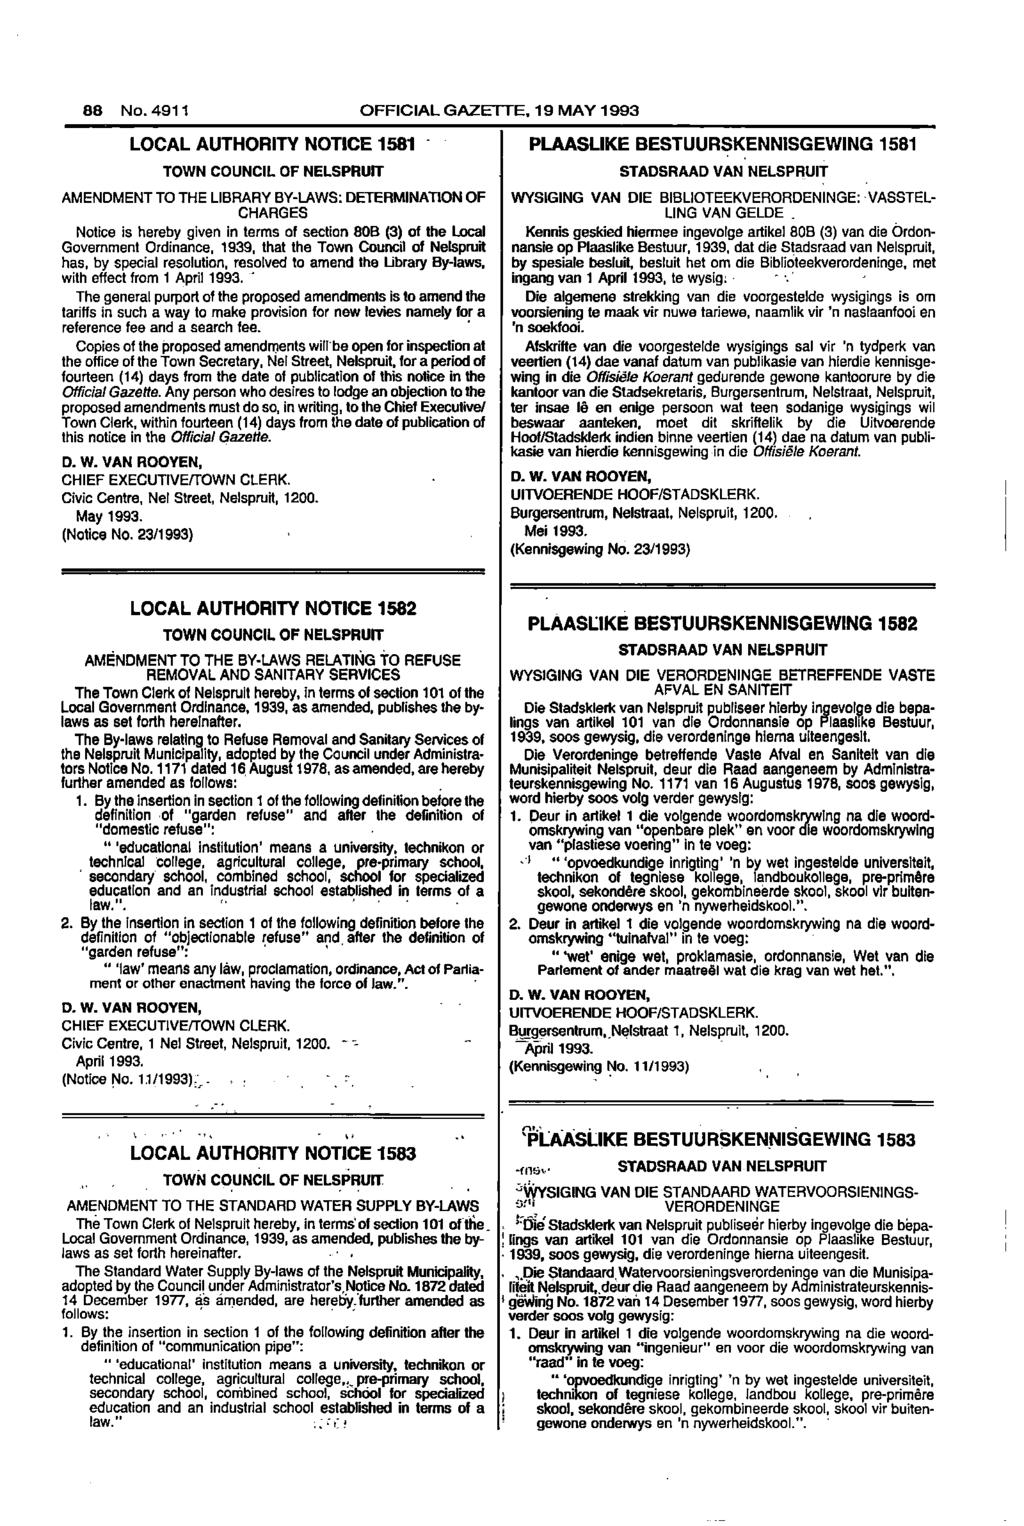 88 No 4911 OFFICIAL GAZETTE 19 MAY 1993 LOCAL AUTHORITY NOTICE 1581 PLAASLIKE BESTUURSKENNISGEWING 1581 TOWN COUNCIL OF NELSPRUIT STADSRAAD VAN NELSPRUIT AMENDMENT TO THE LIBRARY BYLAWS: